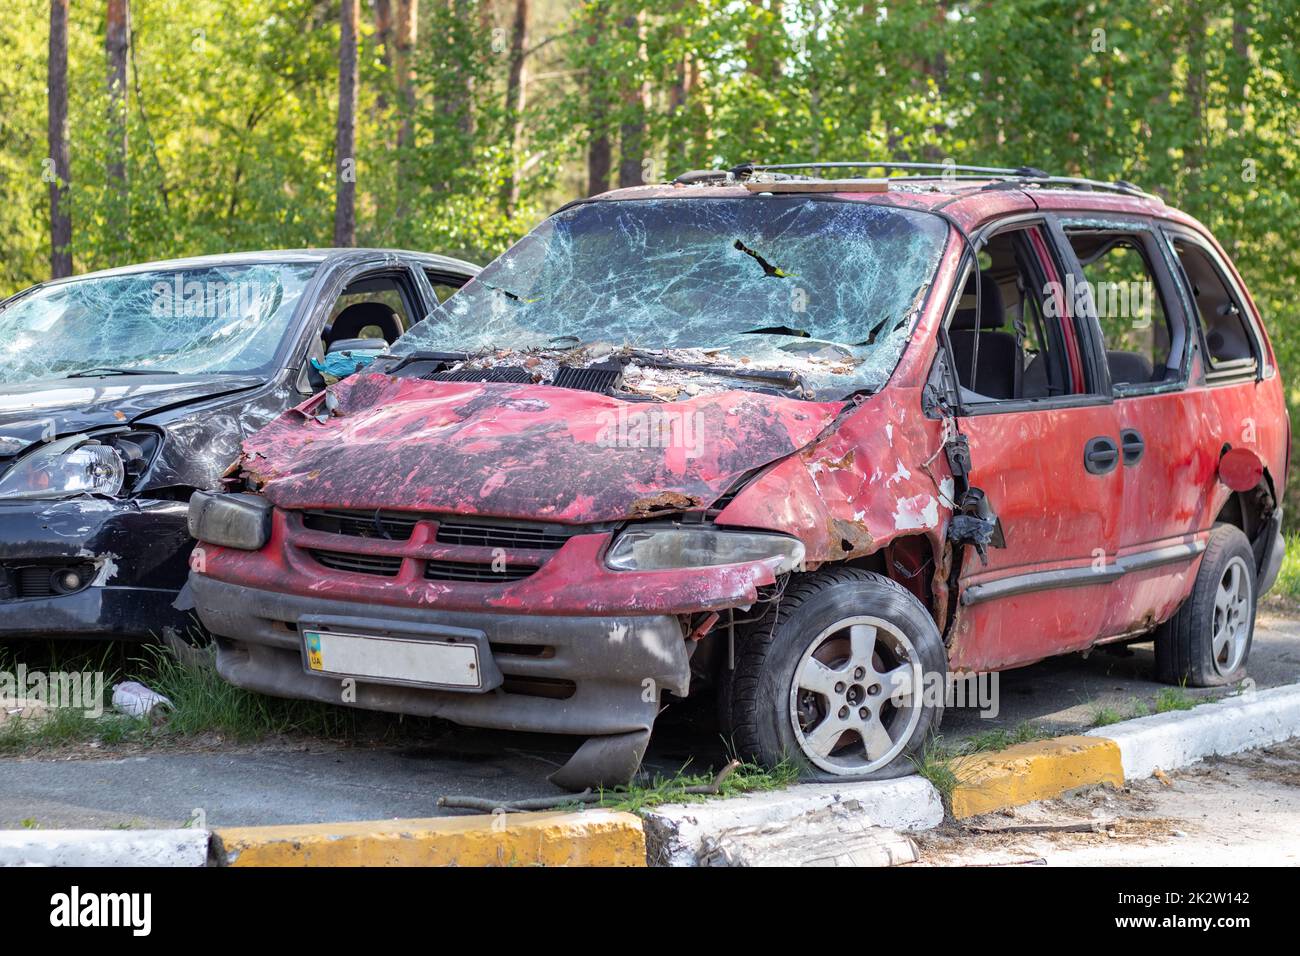 Shot, damaged cars during the war in Ukraine. The vehicle of civilians affected by the hands of the Russian military. Shrapnel and bullet holes in the body of the car. War of Russia against Ukraine. Stock Photo